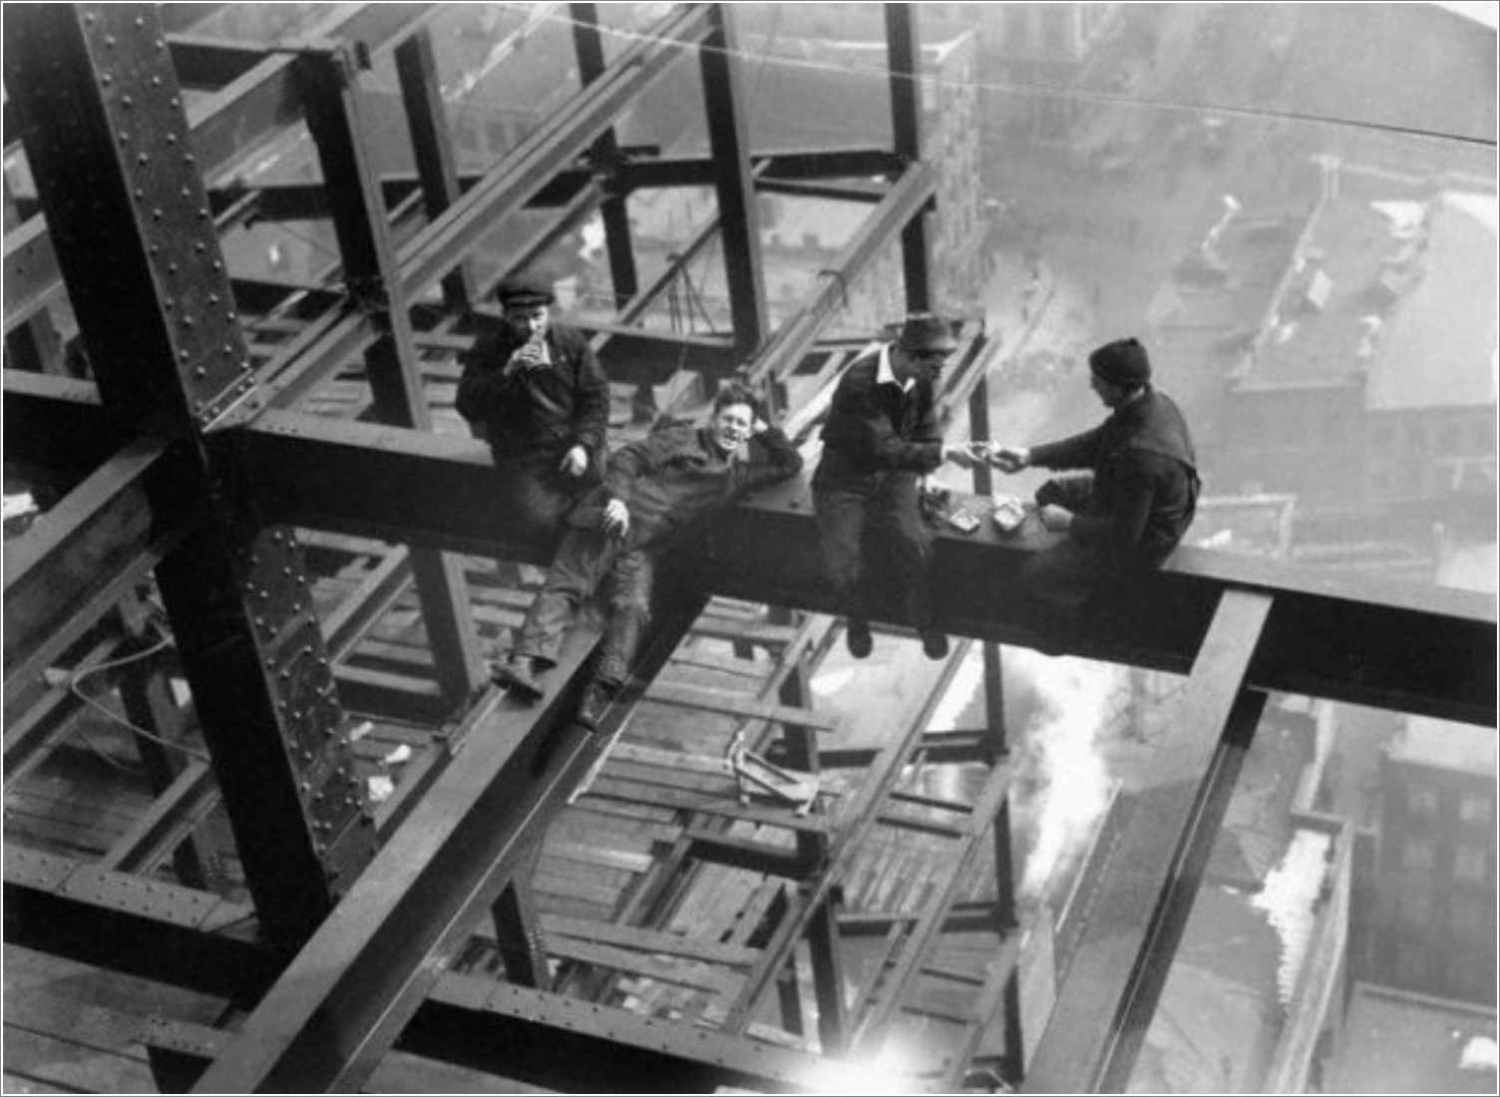 Lunch Atop A Skyscraper: The Truth Behind The Jaw-dropping Photo